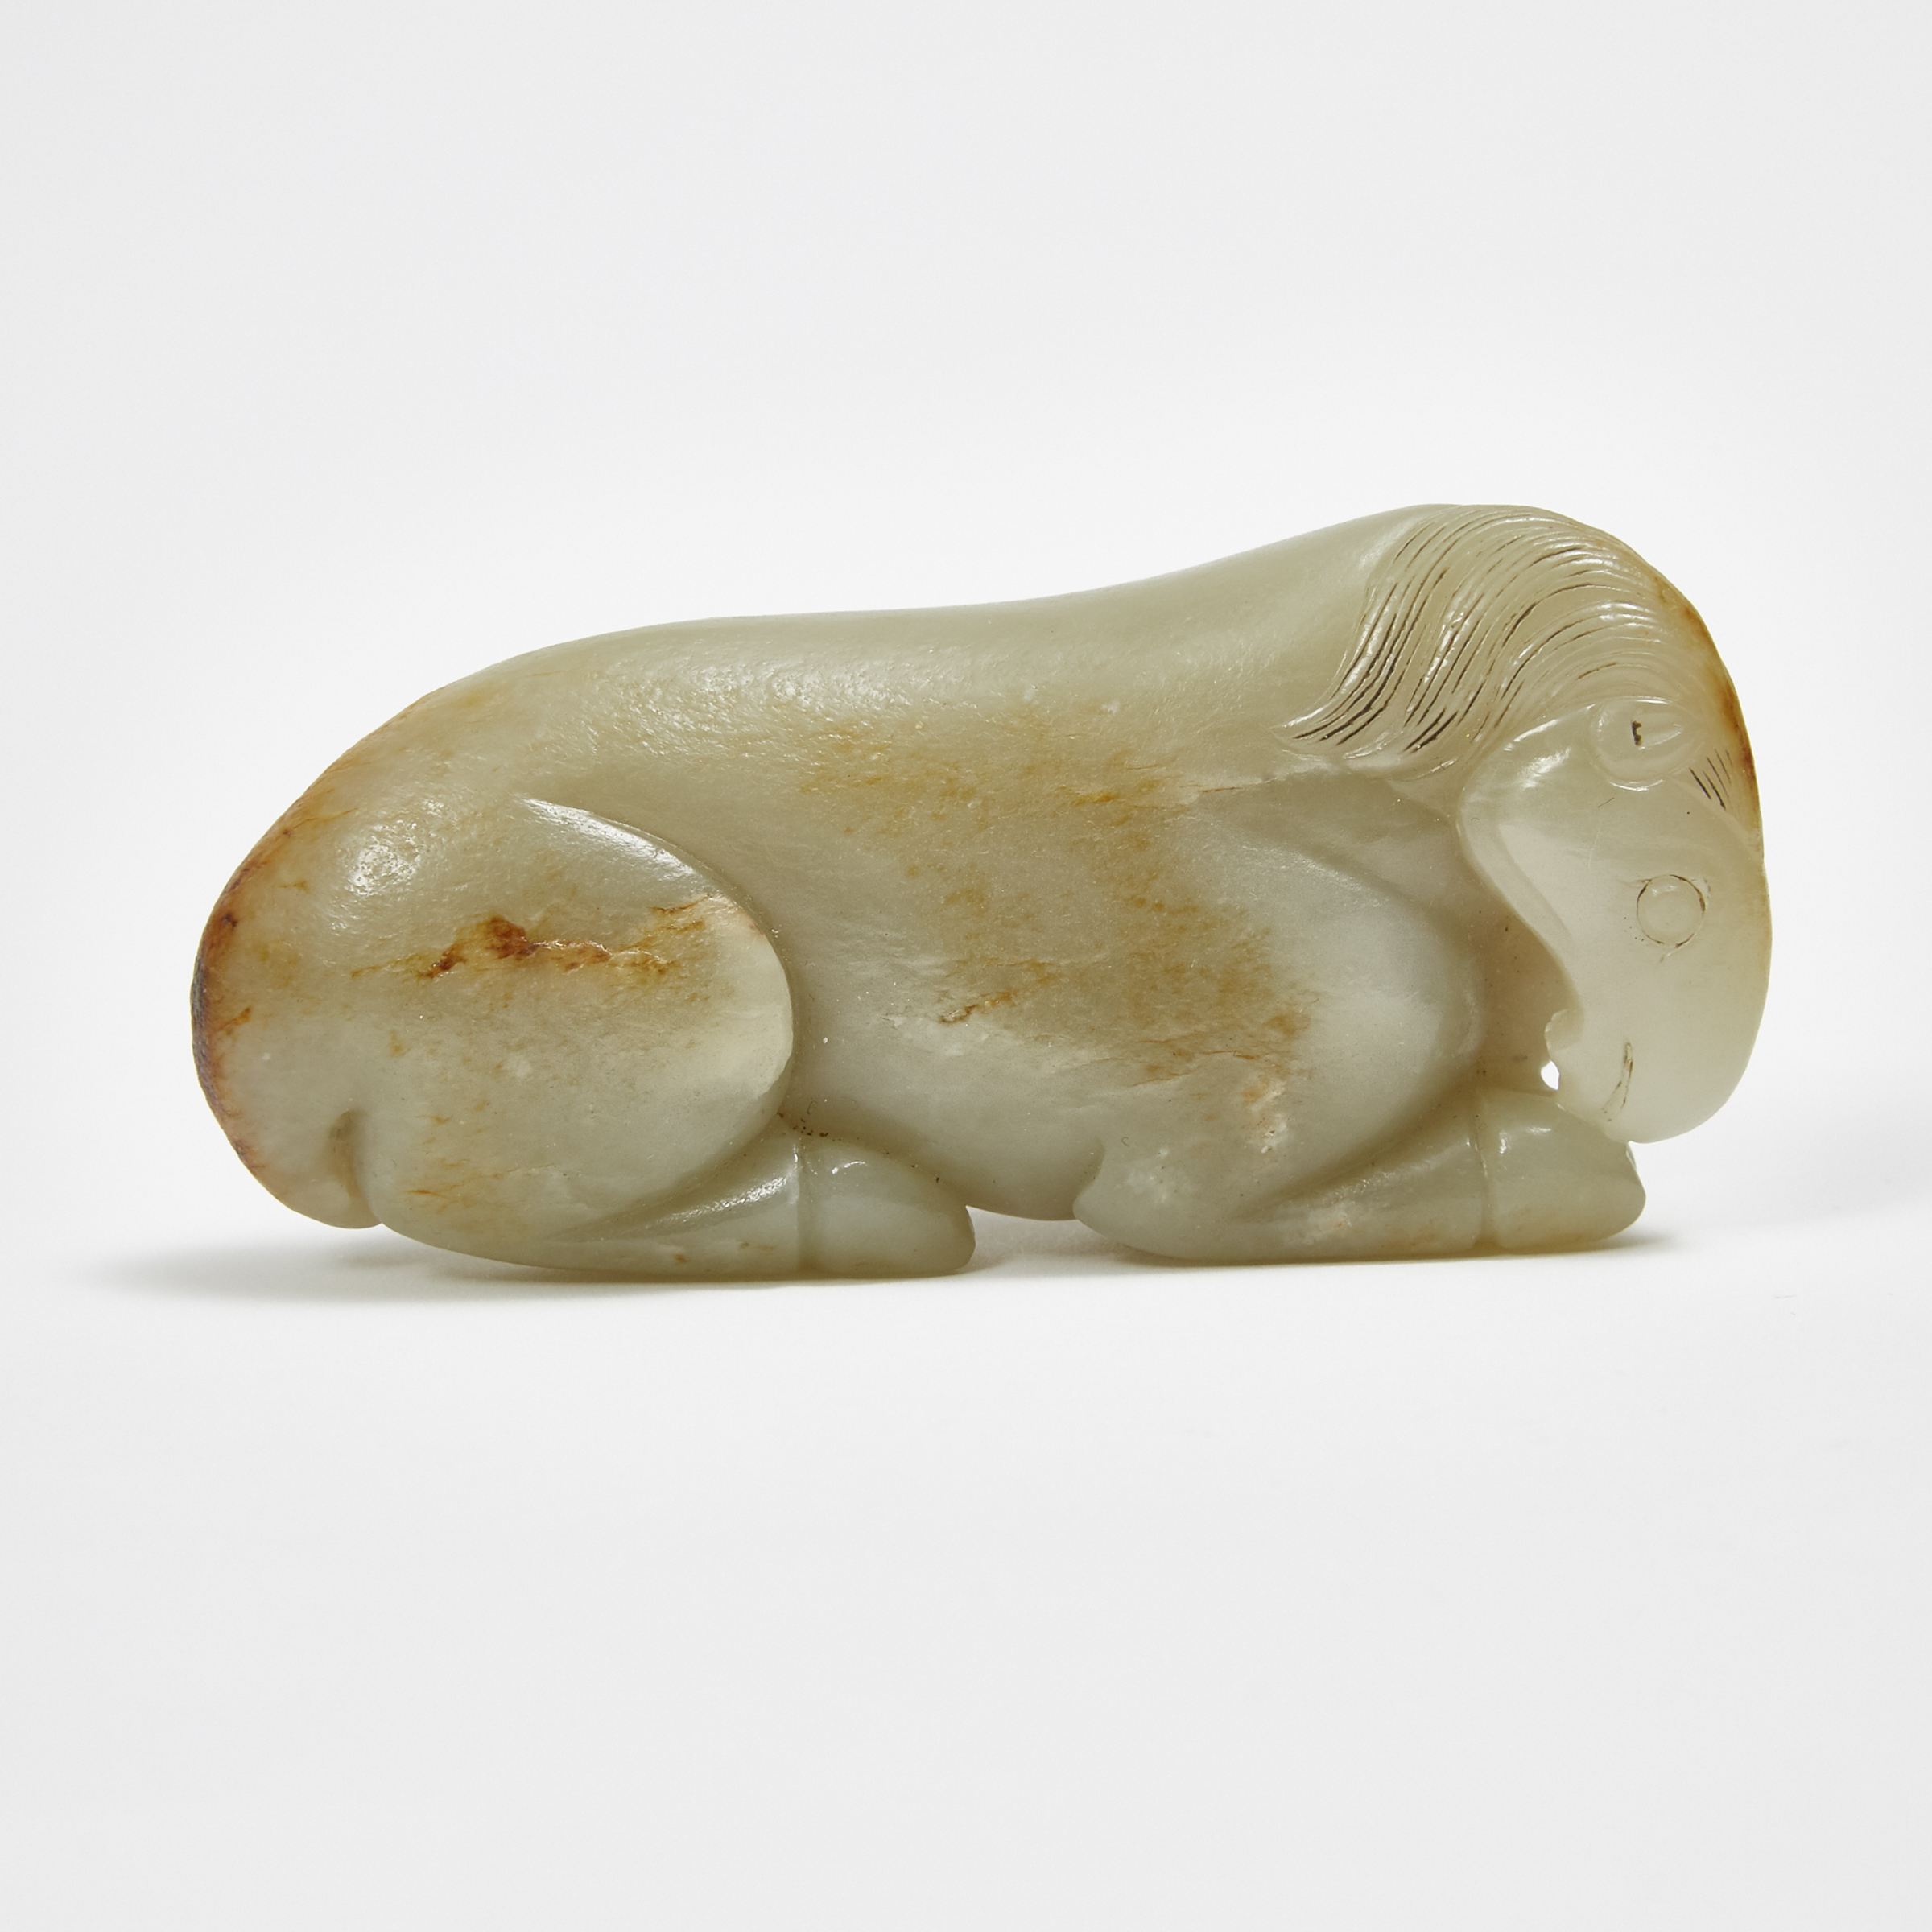 A Greyish-White and Russet Jade Carving of a Horse